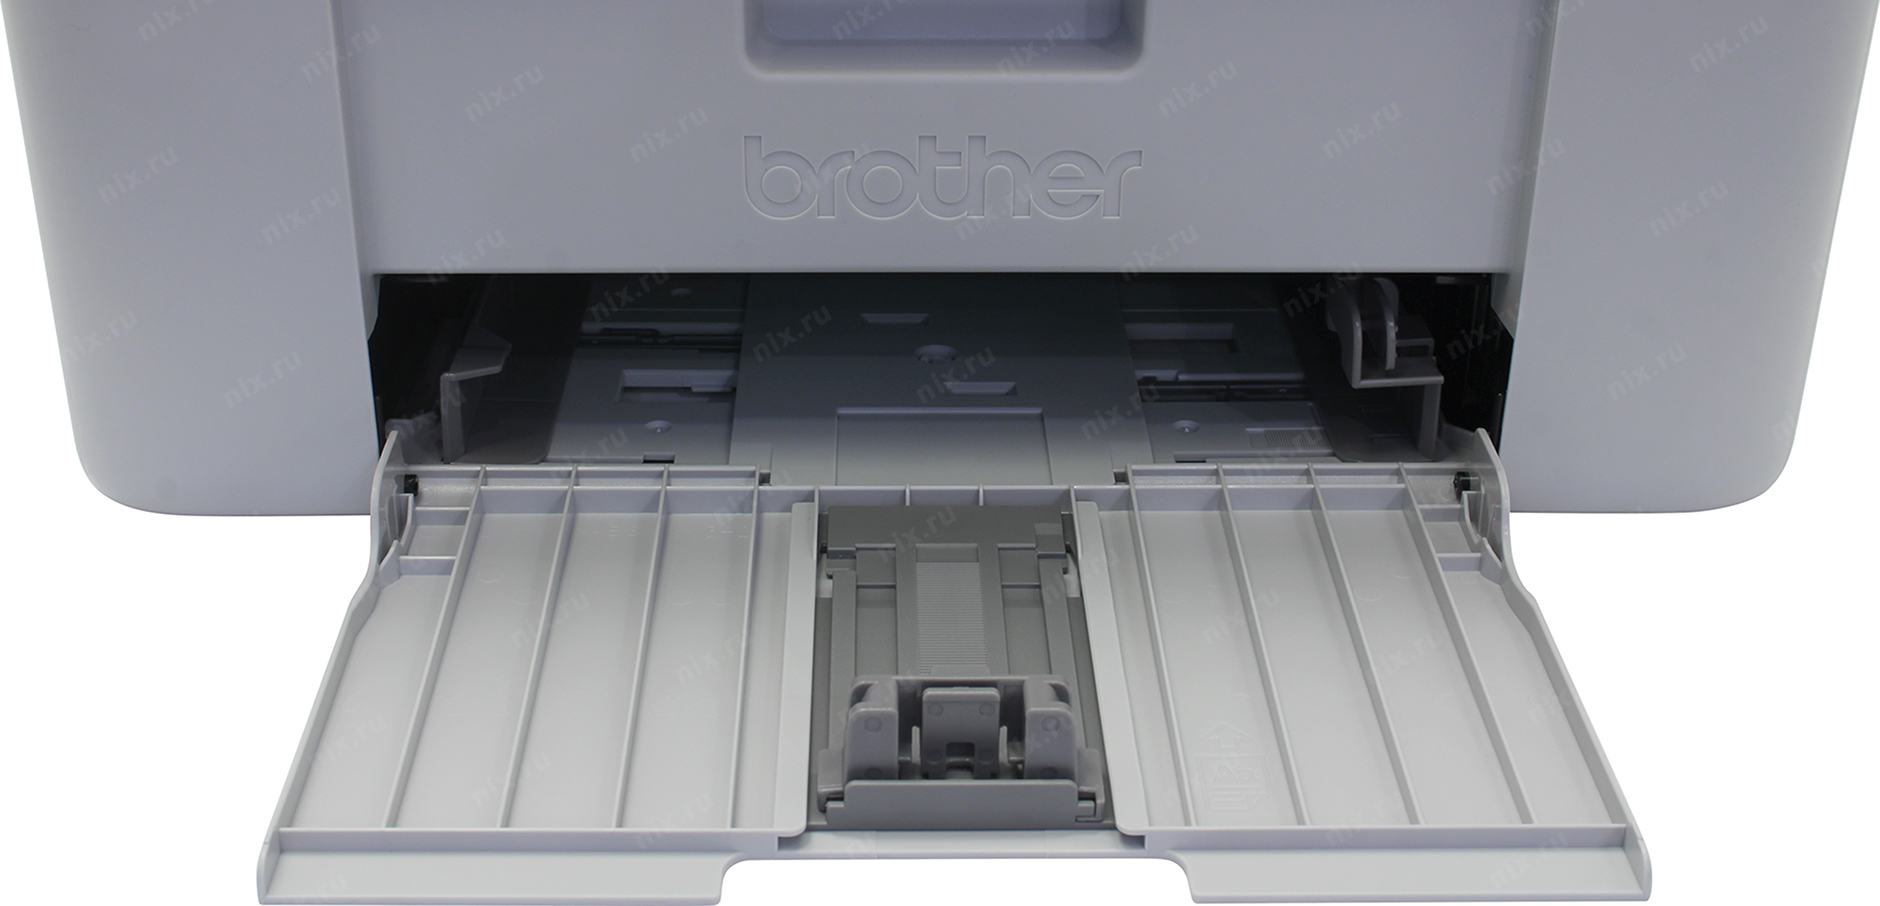 Brother dcp 1623wr. Brother 1623. Brother 1623wr. MФУ brother DCP-1623wr.